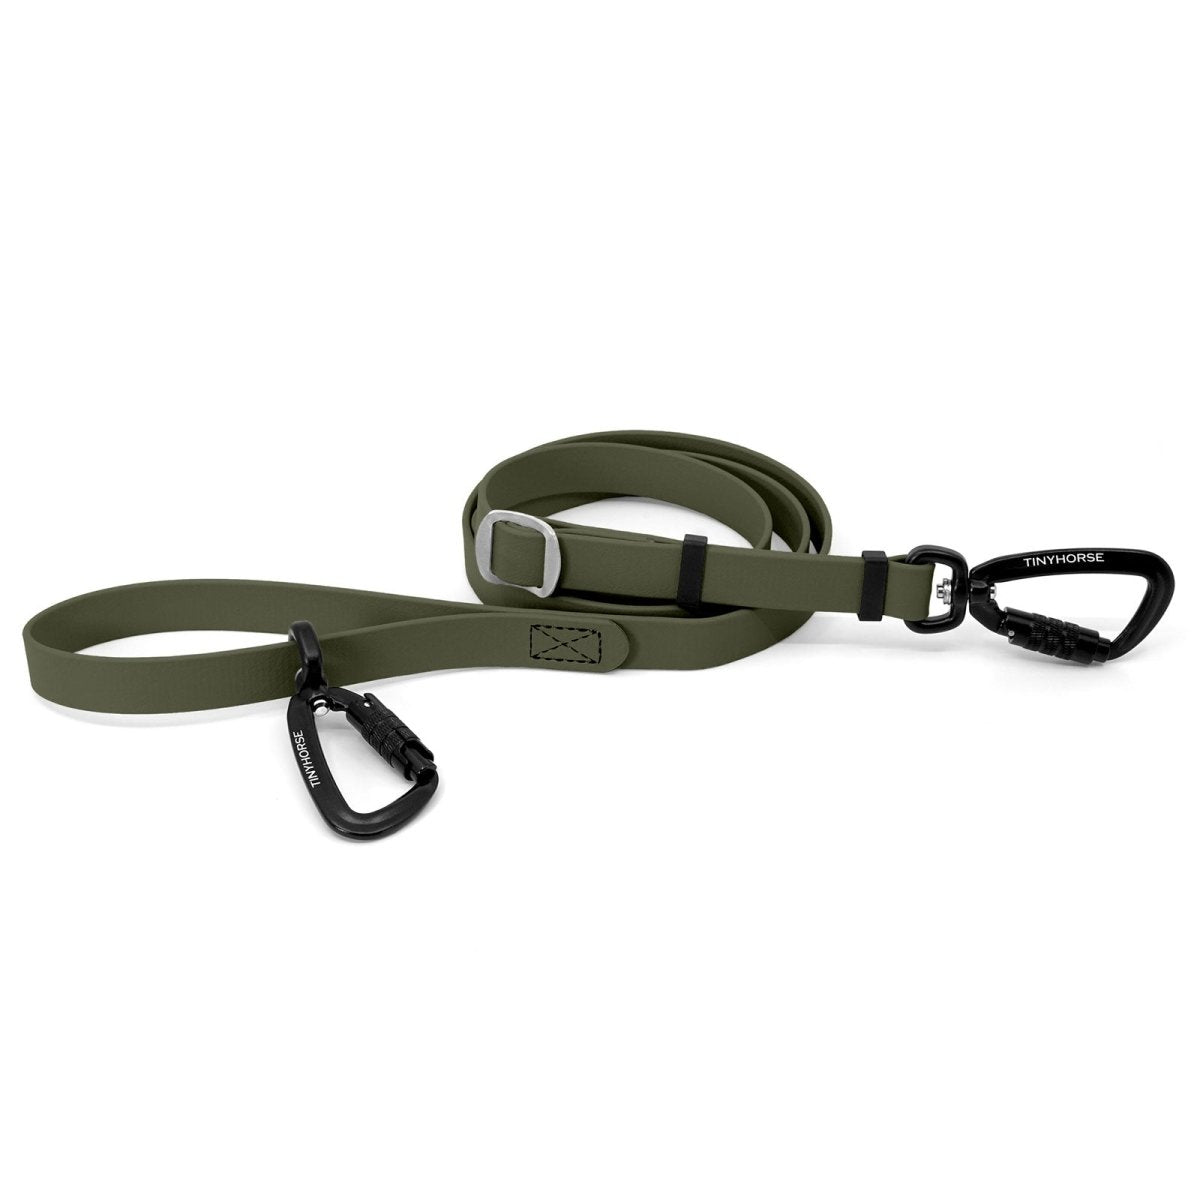 An adjustable olive-coloured Lead-All Pro Extra made of BioThane with 2 auto-locking carabiners